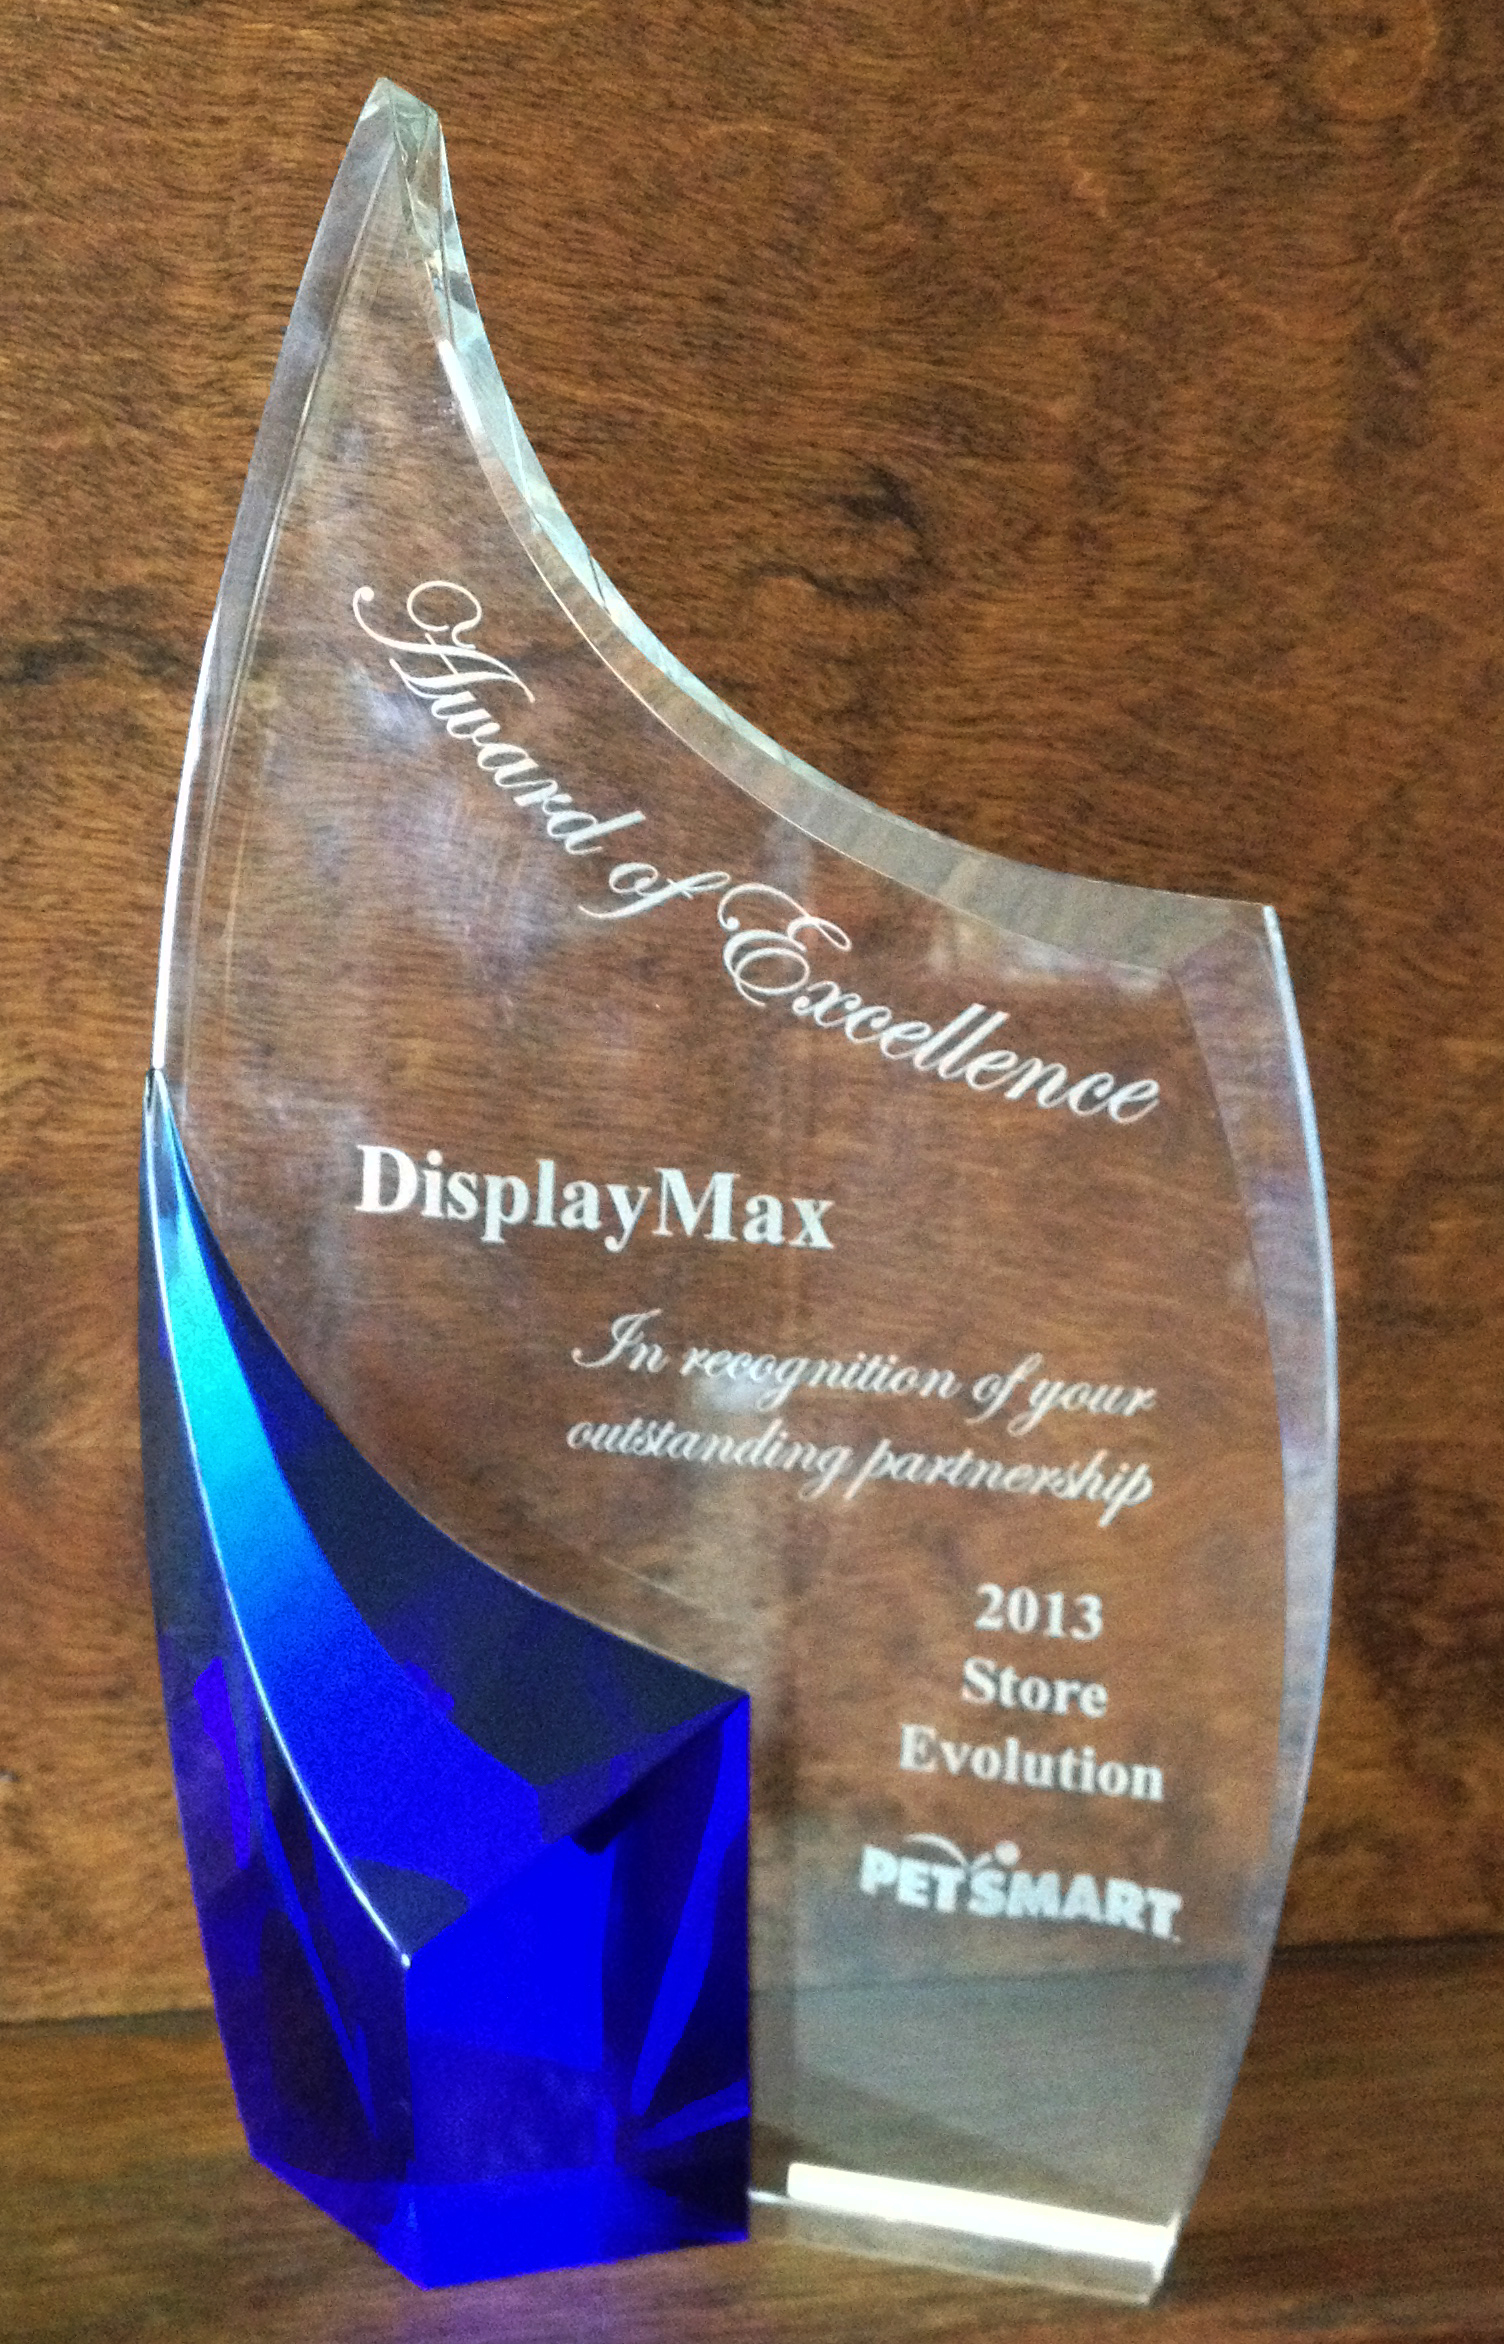 PetSmart Merchandising Company of the Year Award 2013 goes to DisplayMax Merchandising Services